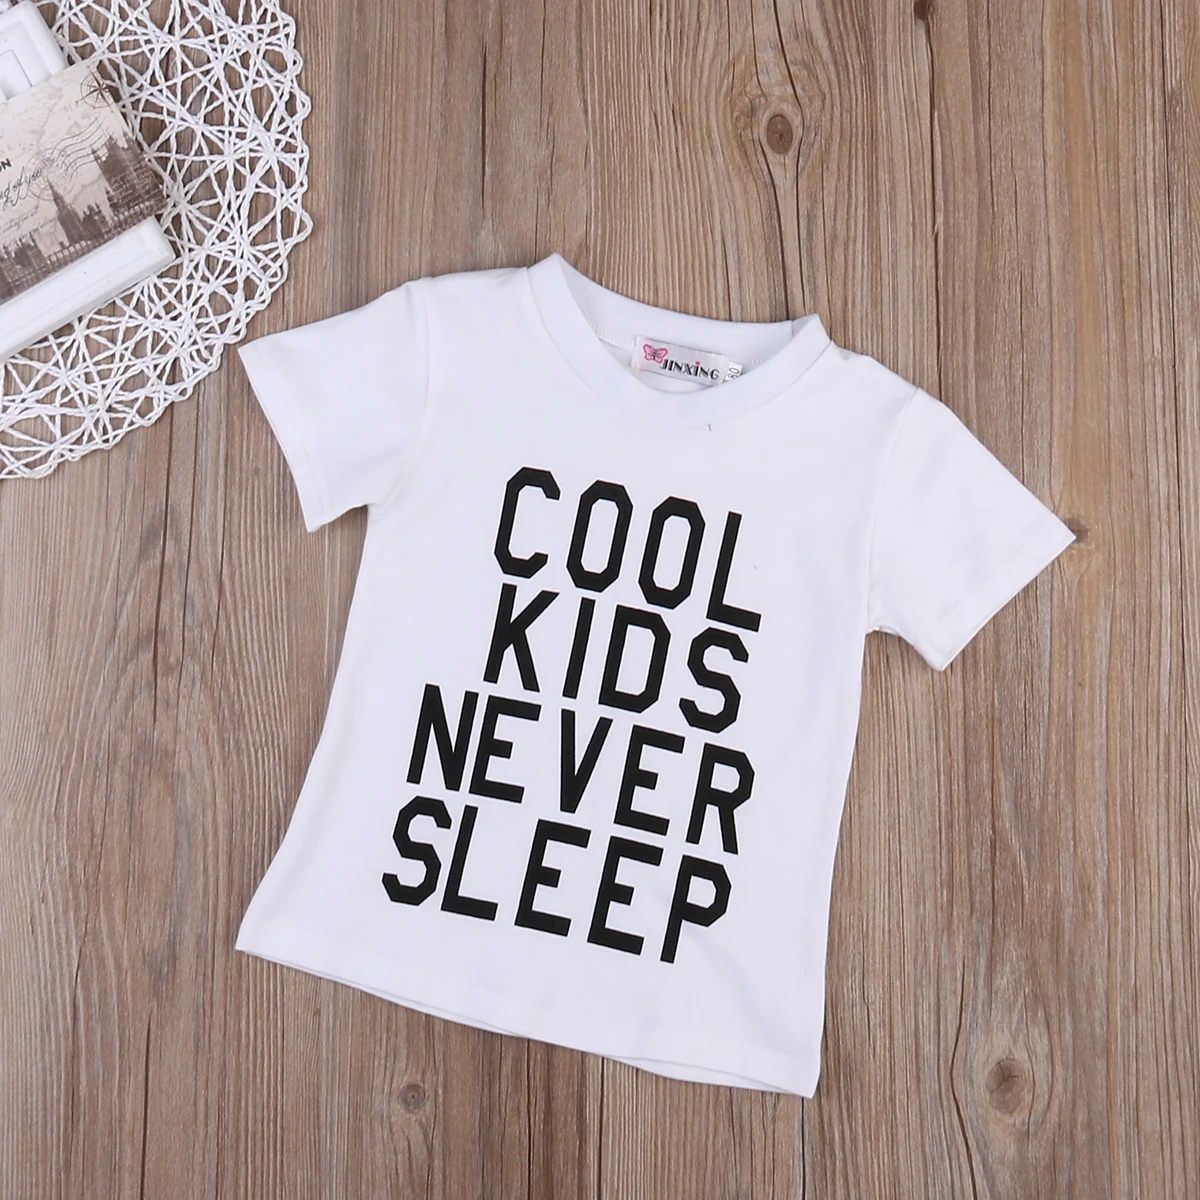 2017-Summer-Toddler-Kids-T-shirt-Cool-Kids-Letter-Printed-Baby-Boy-Girl-T-Shirt-Tops-Short-Sleeve-Cotton-Casual-Clothes-1-6Y-2